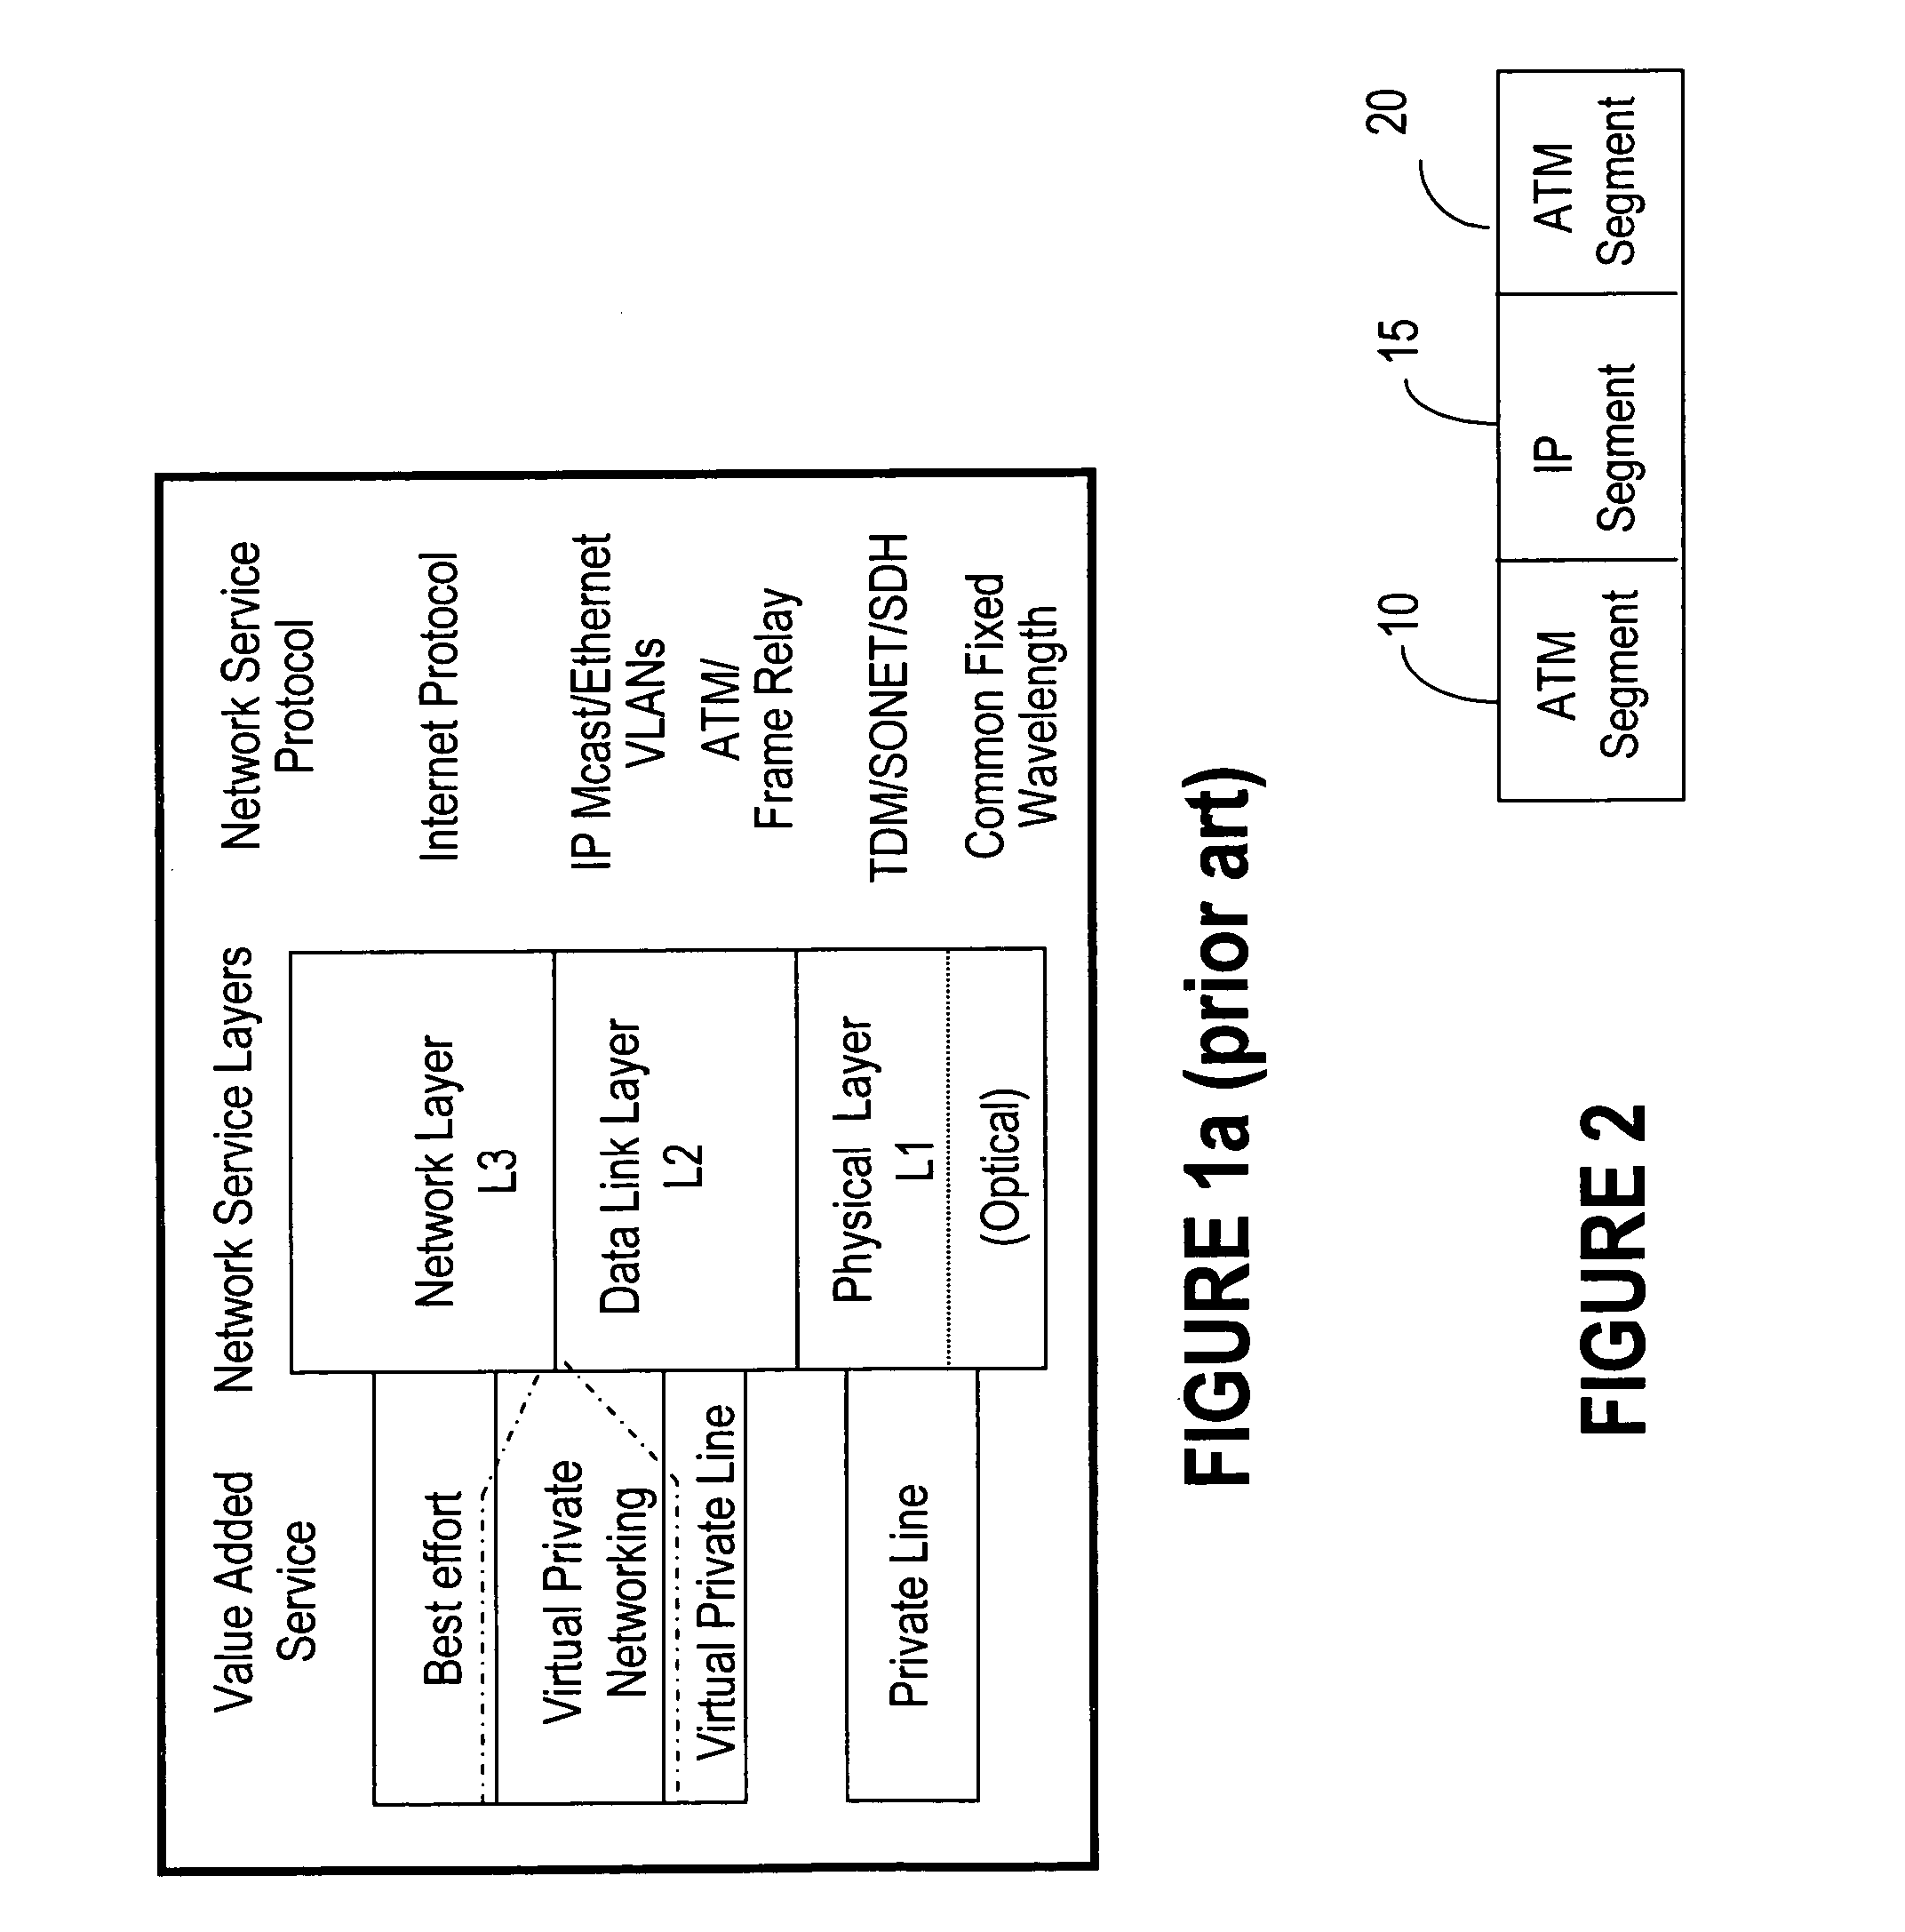 Method of networking systems reliability estimation